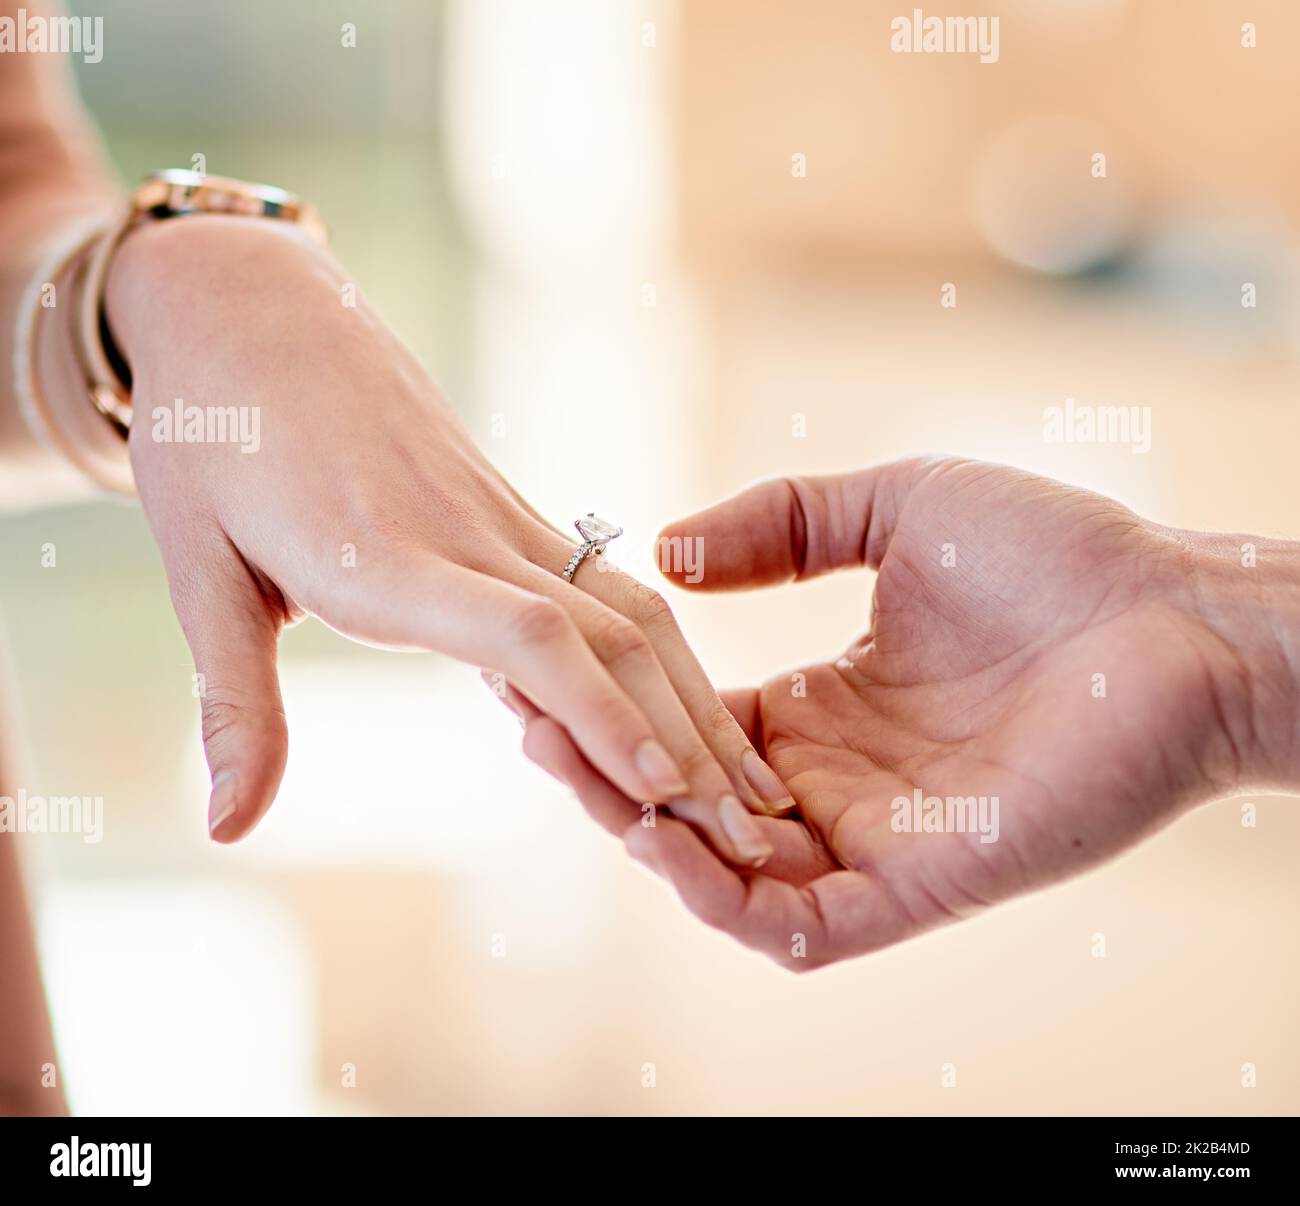 marking their true love closeup shot of a man putting an engagement ring onto his fiancees finger 2K2B4MD